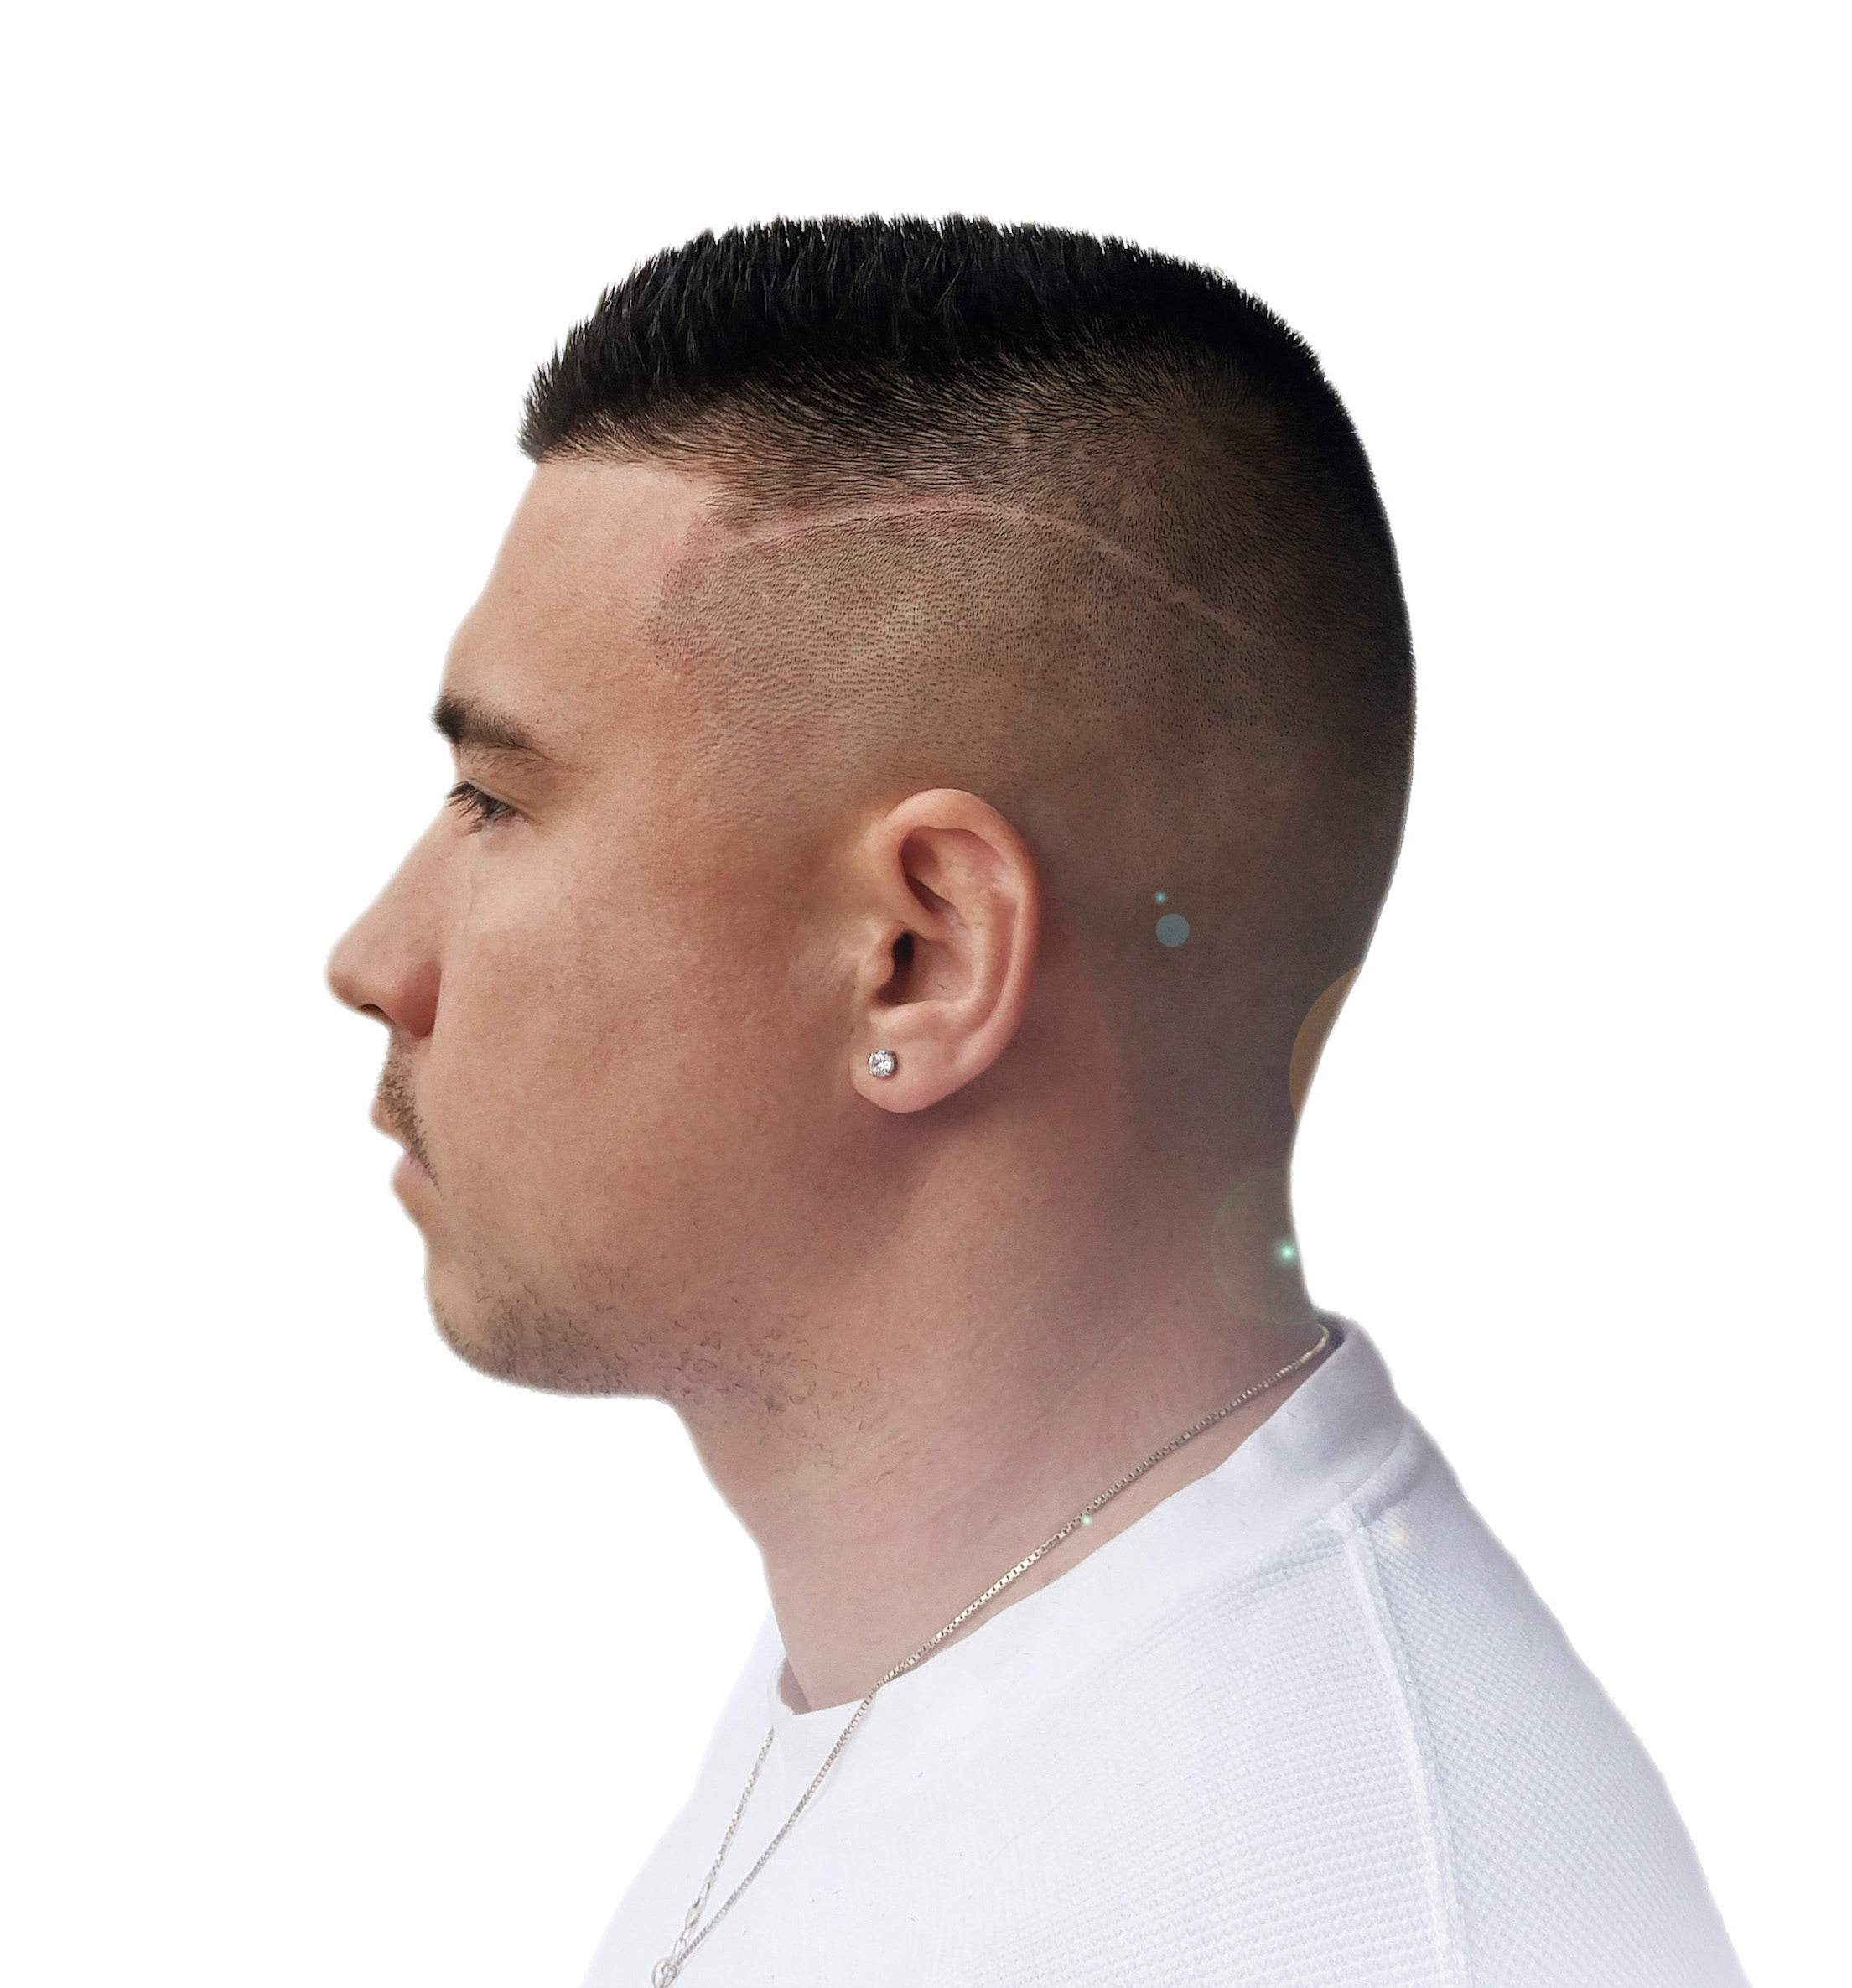 Where to find the best fade barber